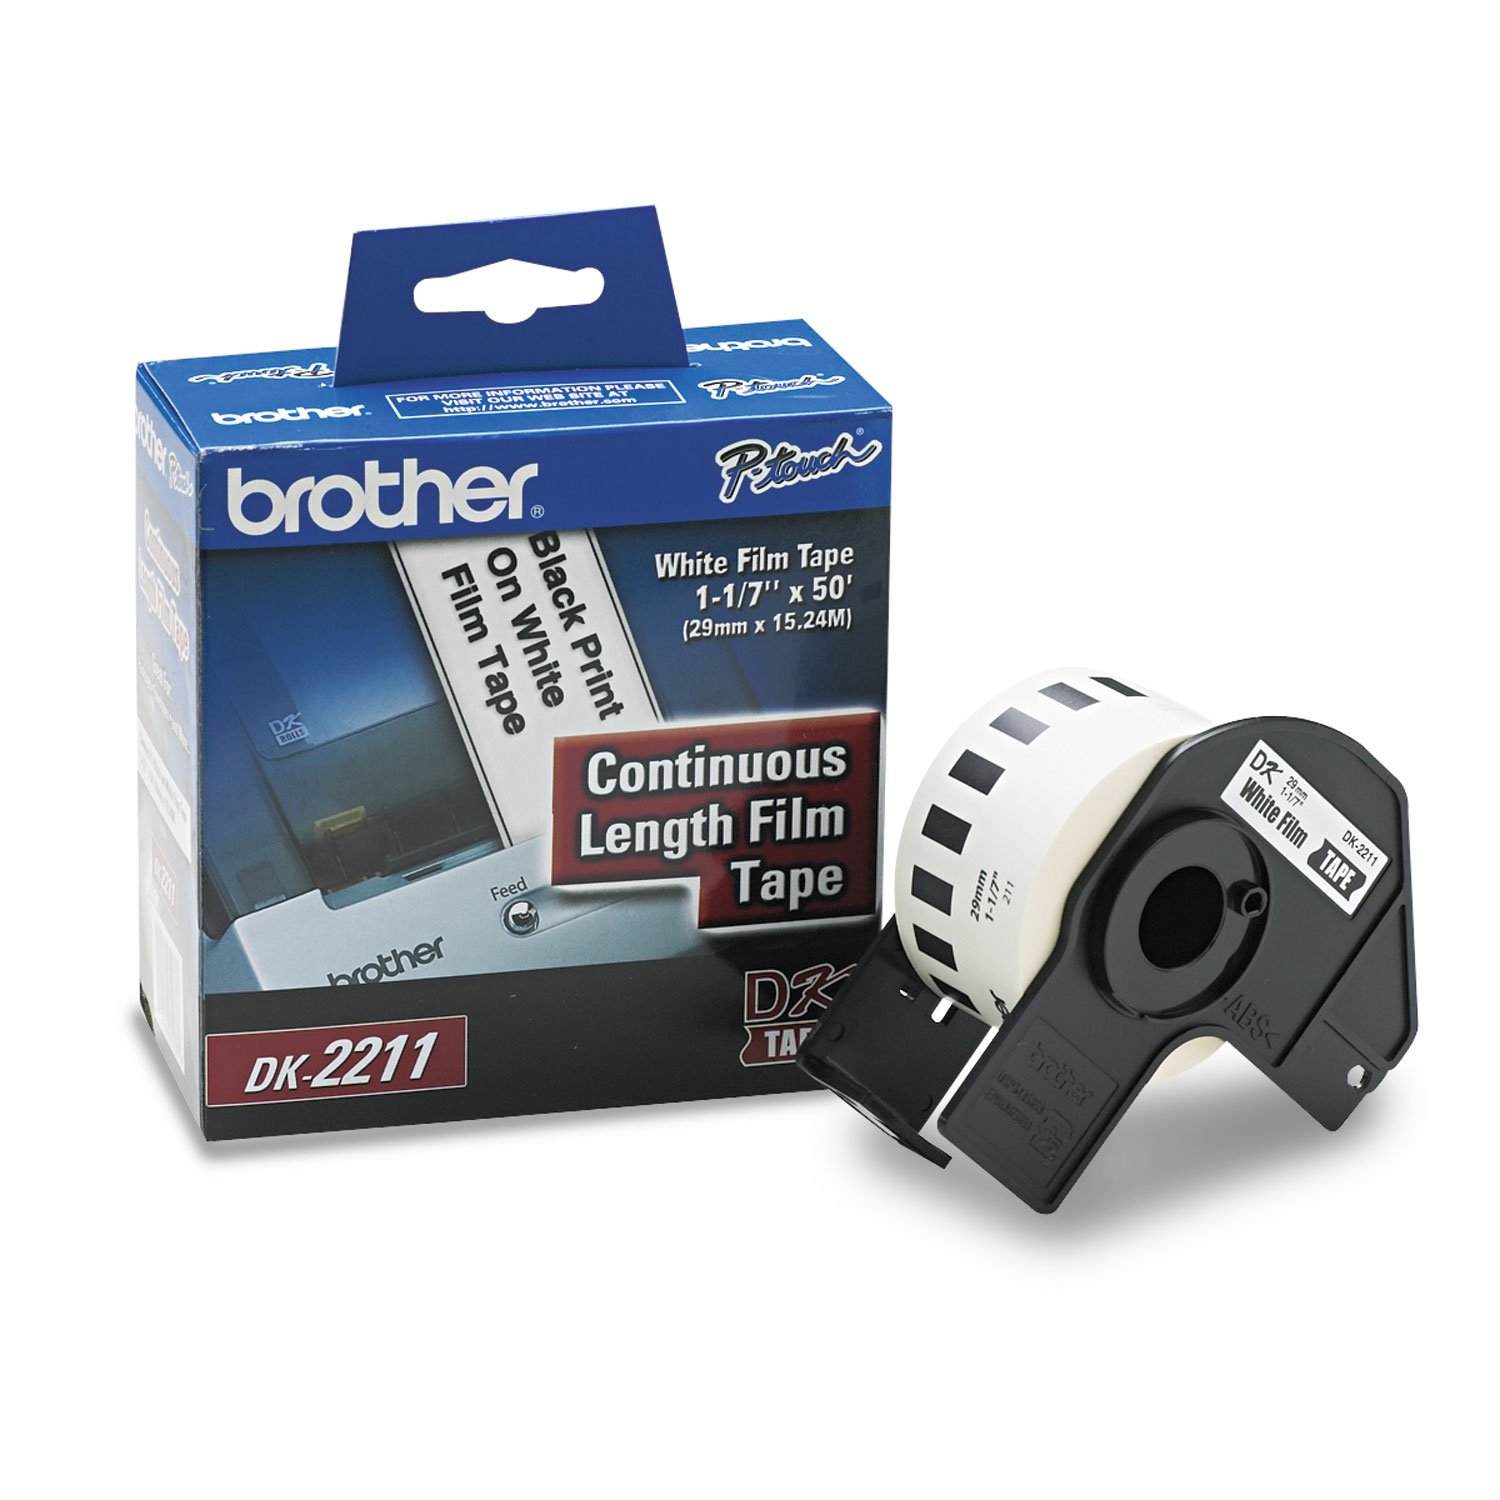  Brother DK2211 Continuous Film Label Tape, 1.1 x 50 ft Roll, White (BRTDK2211) 